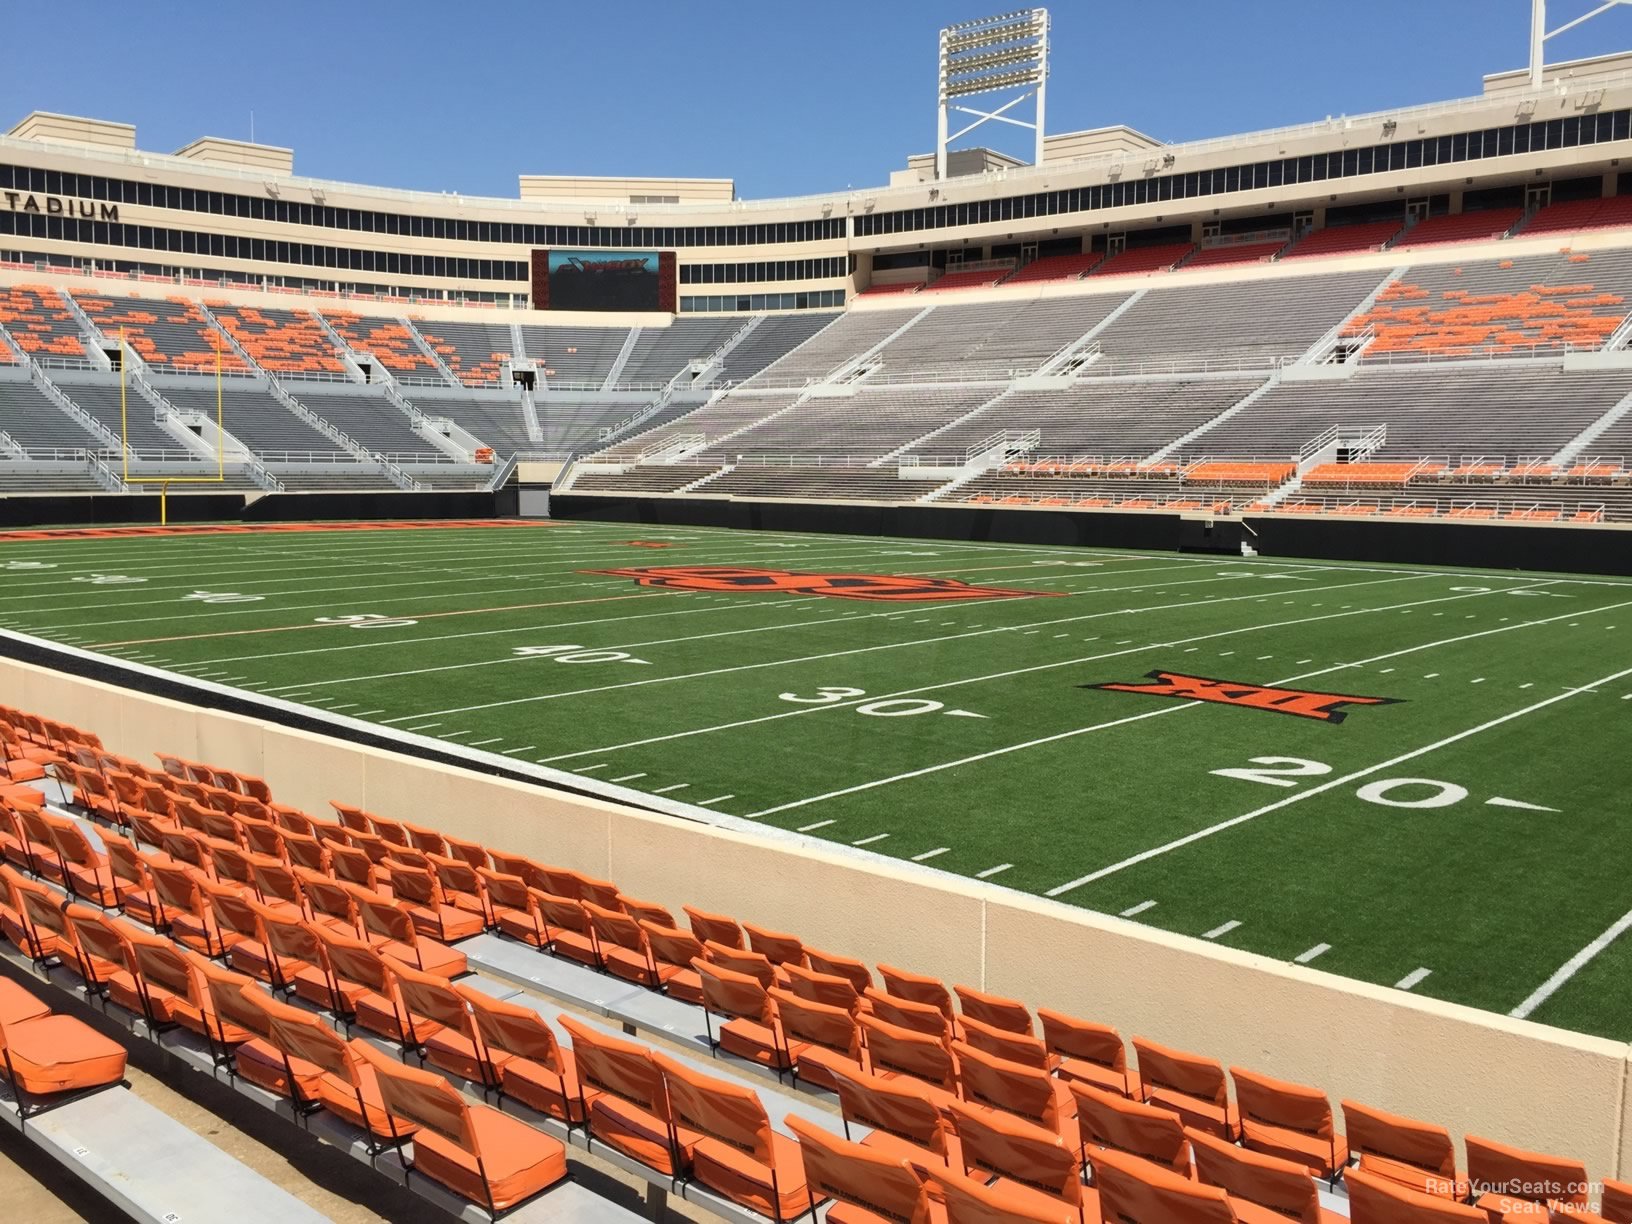 section 102, row 10 seat view  - boone pickens stadium